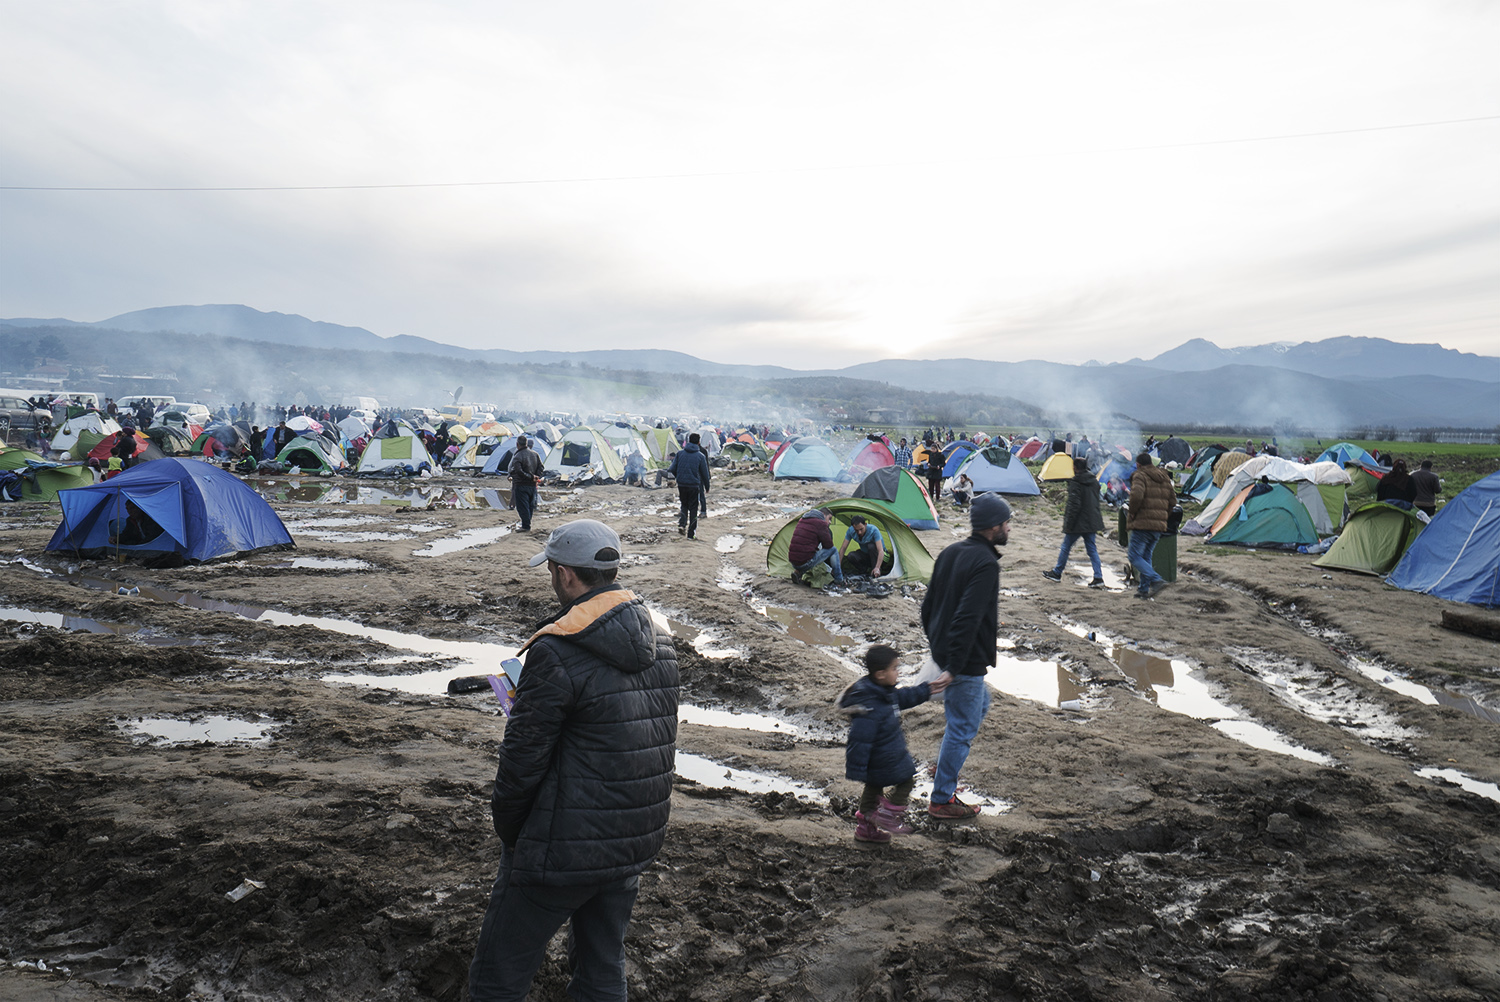 Greece, Idomeni border. Refugees walking down the muddy field, where camping tends have been set up in view of crossing the border. During the first week of March, 50 persons per day were allowed to cross the border with Macedona according to the date of arrival in Greece. As of the second week of March, border closed completely. No one was allowed to cross. As a result, that self-organized and not authorised refugee camp built arond Idomeni train -lane expaned dramatically. Greece, Idomeni border. The border between Greece and Macedonia has become a not recognized refugee camp where approx. 12.000 Syrian and iraqui refugees are awaiting for its reopening in the hope of achieving the German dream. As the meeting between EU and Turkey didn't lead to any changes on the ground, Syrian, Iraqui, Palestinians, Afghans, Pakistani refugees got trapped in that slot of the Greek territory with no way forward. No space for accommodating them is currently available in the existing camps (Diavata, Cherso and Nea Kavala) set up by the Greek Army. As such, prevented from crossing the border and not allowed to enter the camps, refugees will be relying on the international humanitarian assistance and ... on their hope, if it will be still there despite the life-threatening conditions in Idomeni. On March 18th, the EU and Turkey signed a new plan, according to which migrants arriving in Greece will be sent back to Turkey if they do not apply for asylum or their claim is rejected.